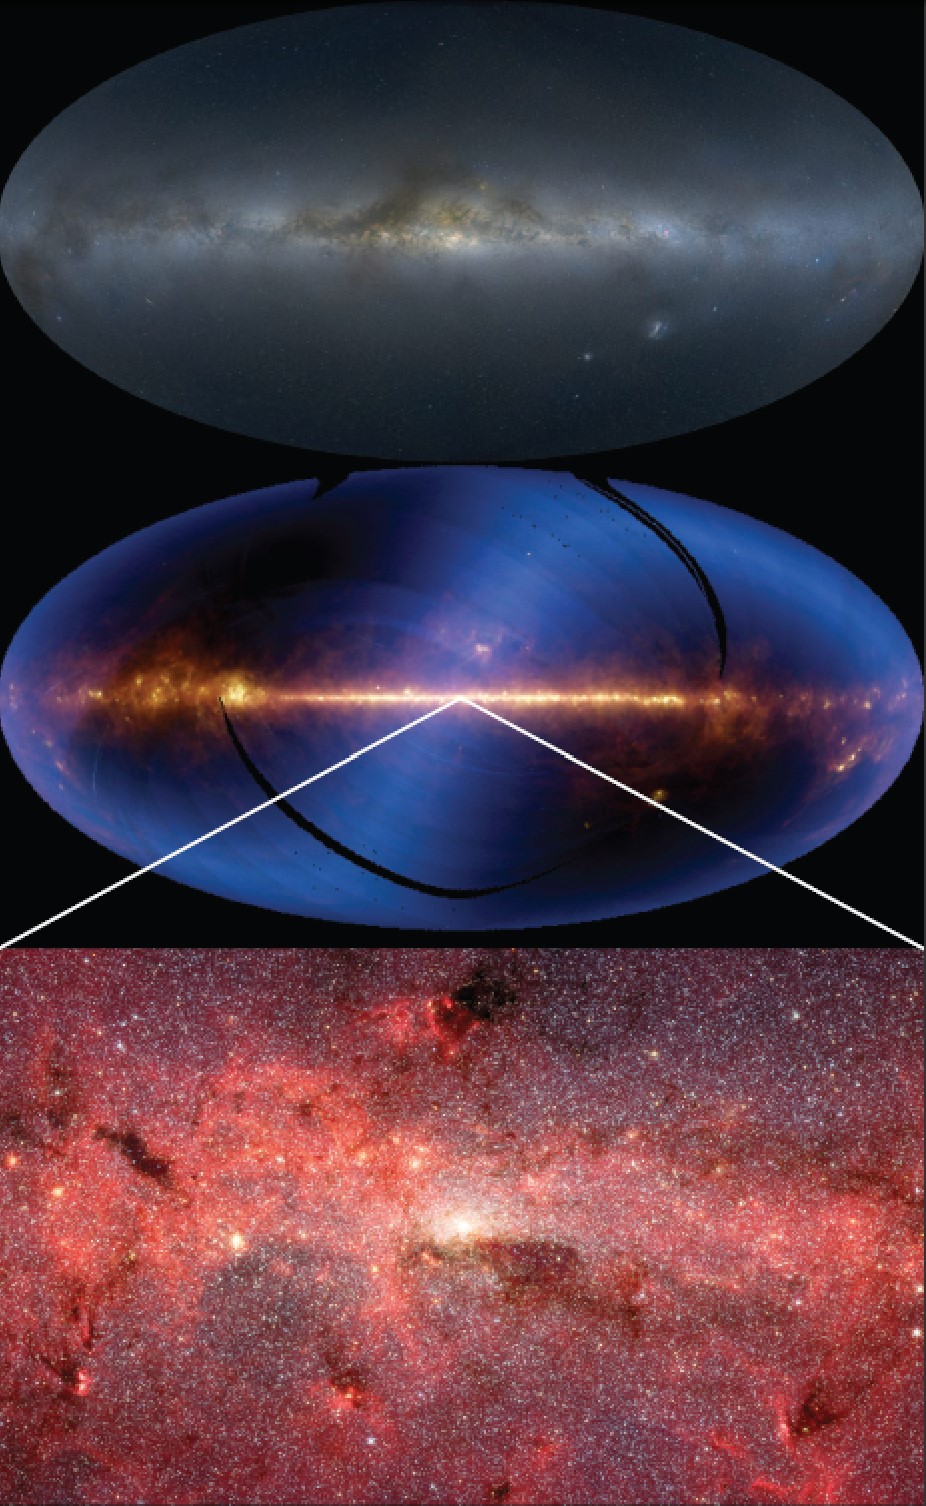 Figure 1. Visible (top) and infrared (center) views highlight the different appearance of the entire sky at different wavelengths. These images are presented so that the Milky Way, which is our view of the plane of our galaxies, runs horizontally through the center of each image. The infrared image is a signature product of the IRAS mission, discussed in this article. The bottom panel zooms in on Spitzer’s view of the central 2900 x 1100 light-years of the galaxy, including the Galactic Center, home to the recently imaged black hole, Sgr A*. The red glow represents radiation from the hydrocarbon molecules which abound in the galaxy. Credit: A. Mellinger - top; NASA/JPL-Caltech – middle; R. Arendt/AAS – bottom